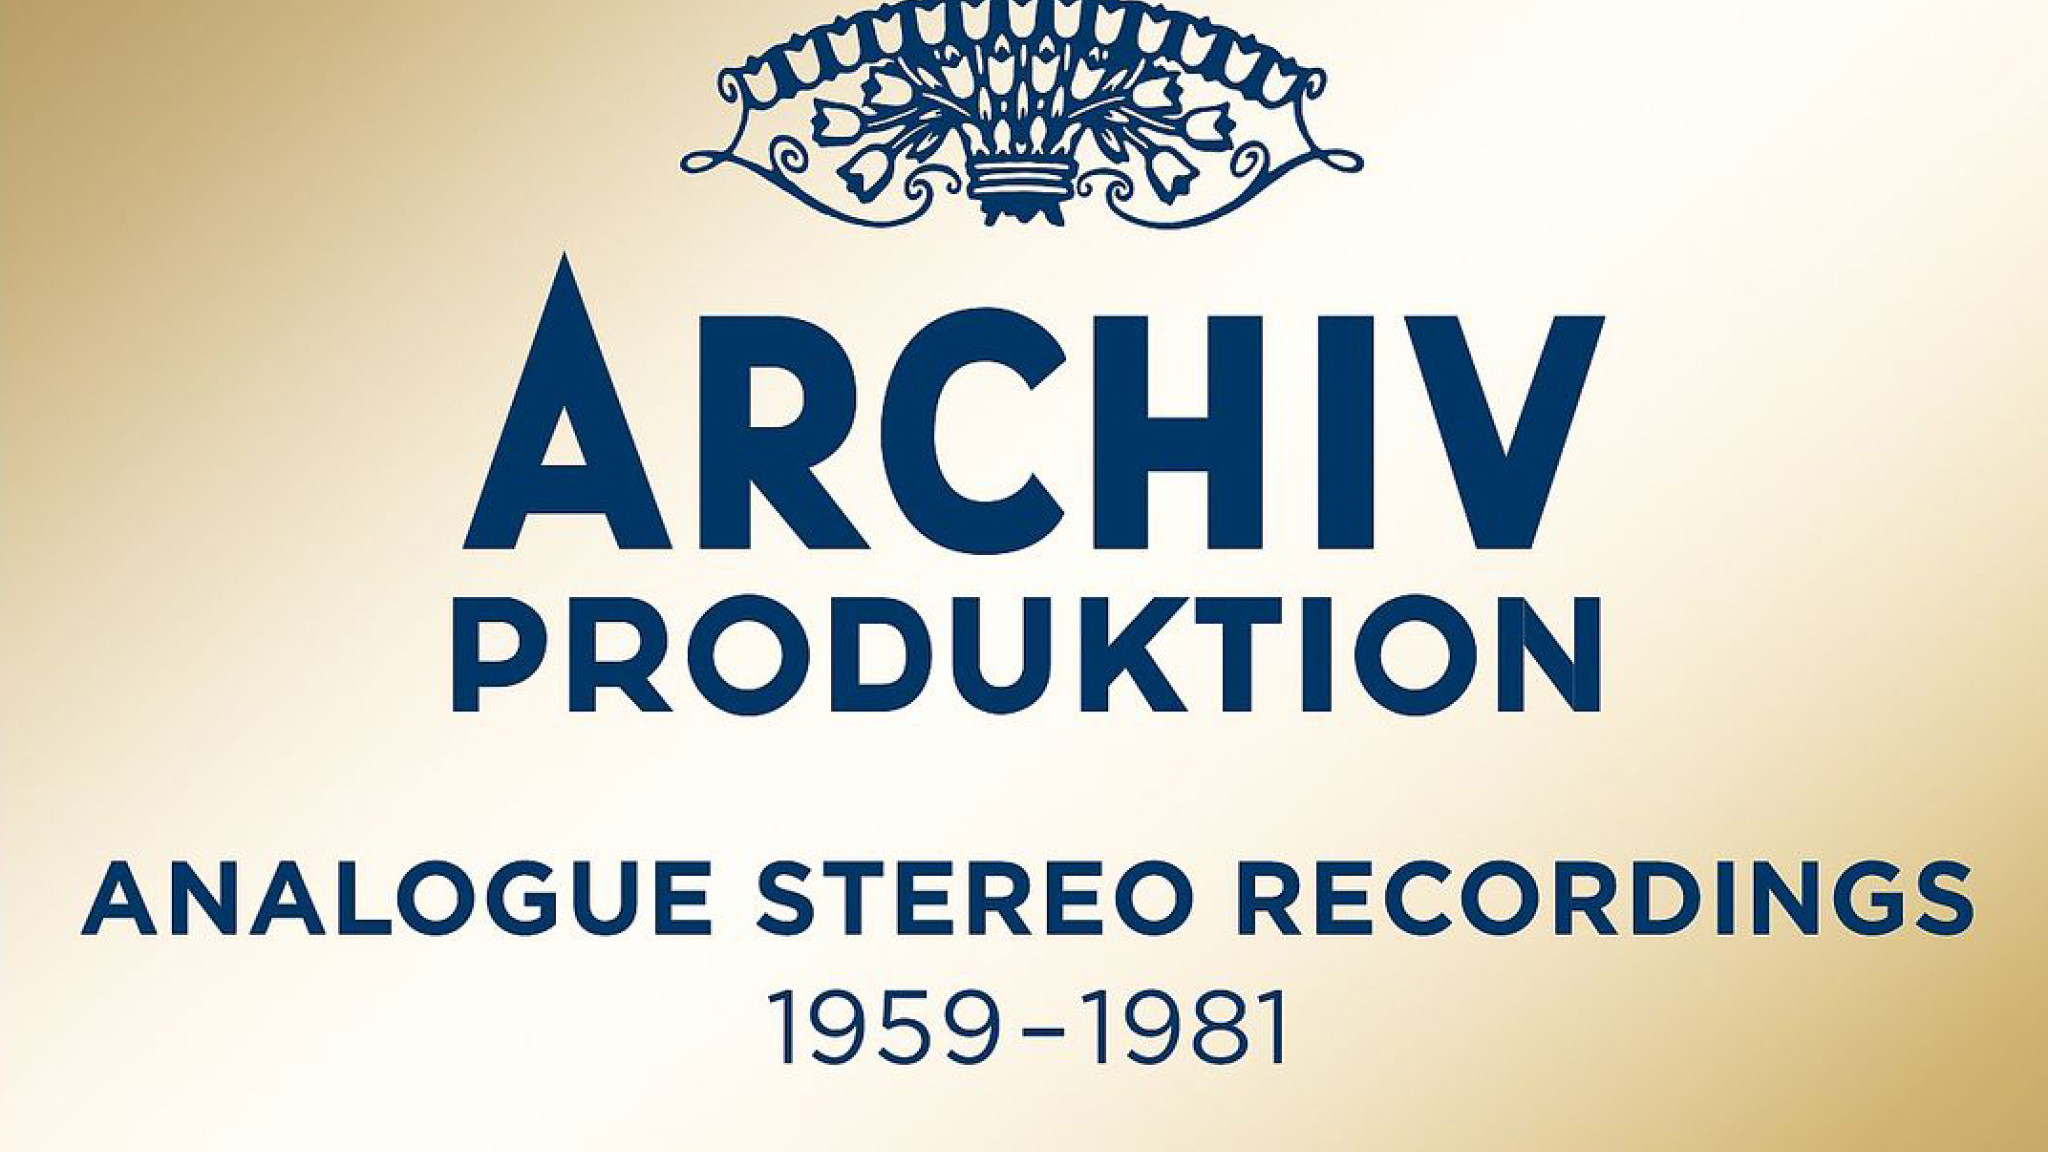 Archiv Produktion - Analogue Stereo Recordings 1959 - 1981